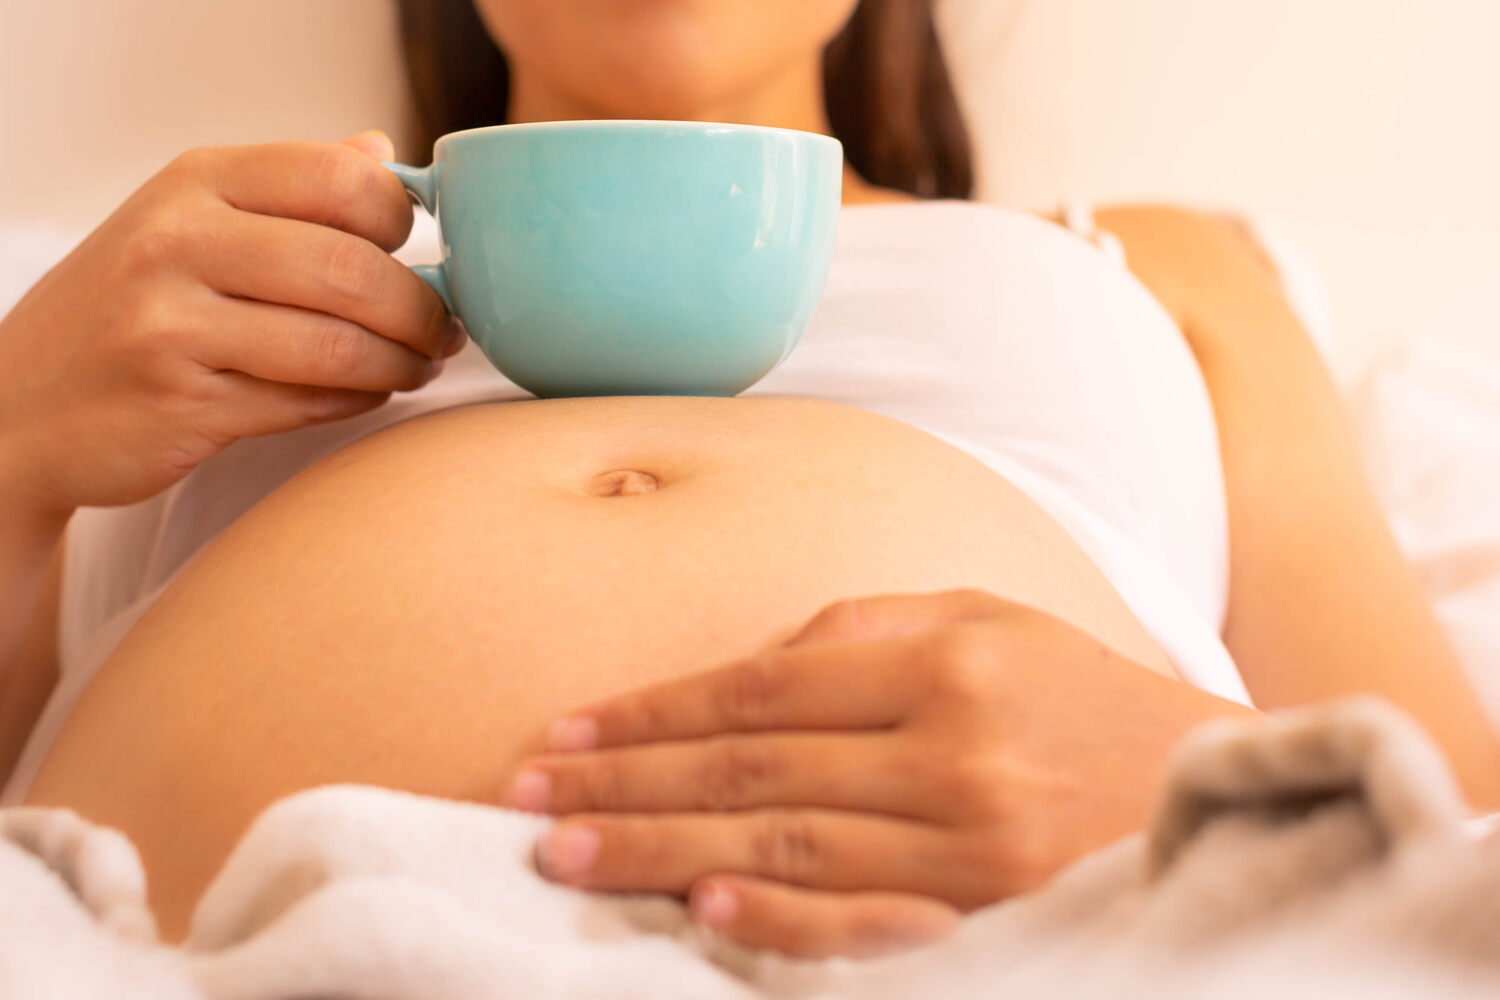 What Are The Side Effects Of Excess Decaf Coffee Consumption During Pregnancy_